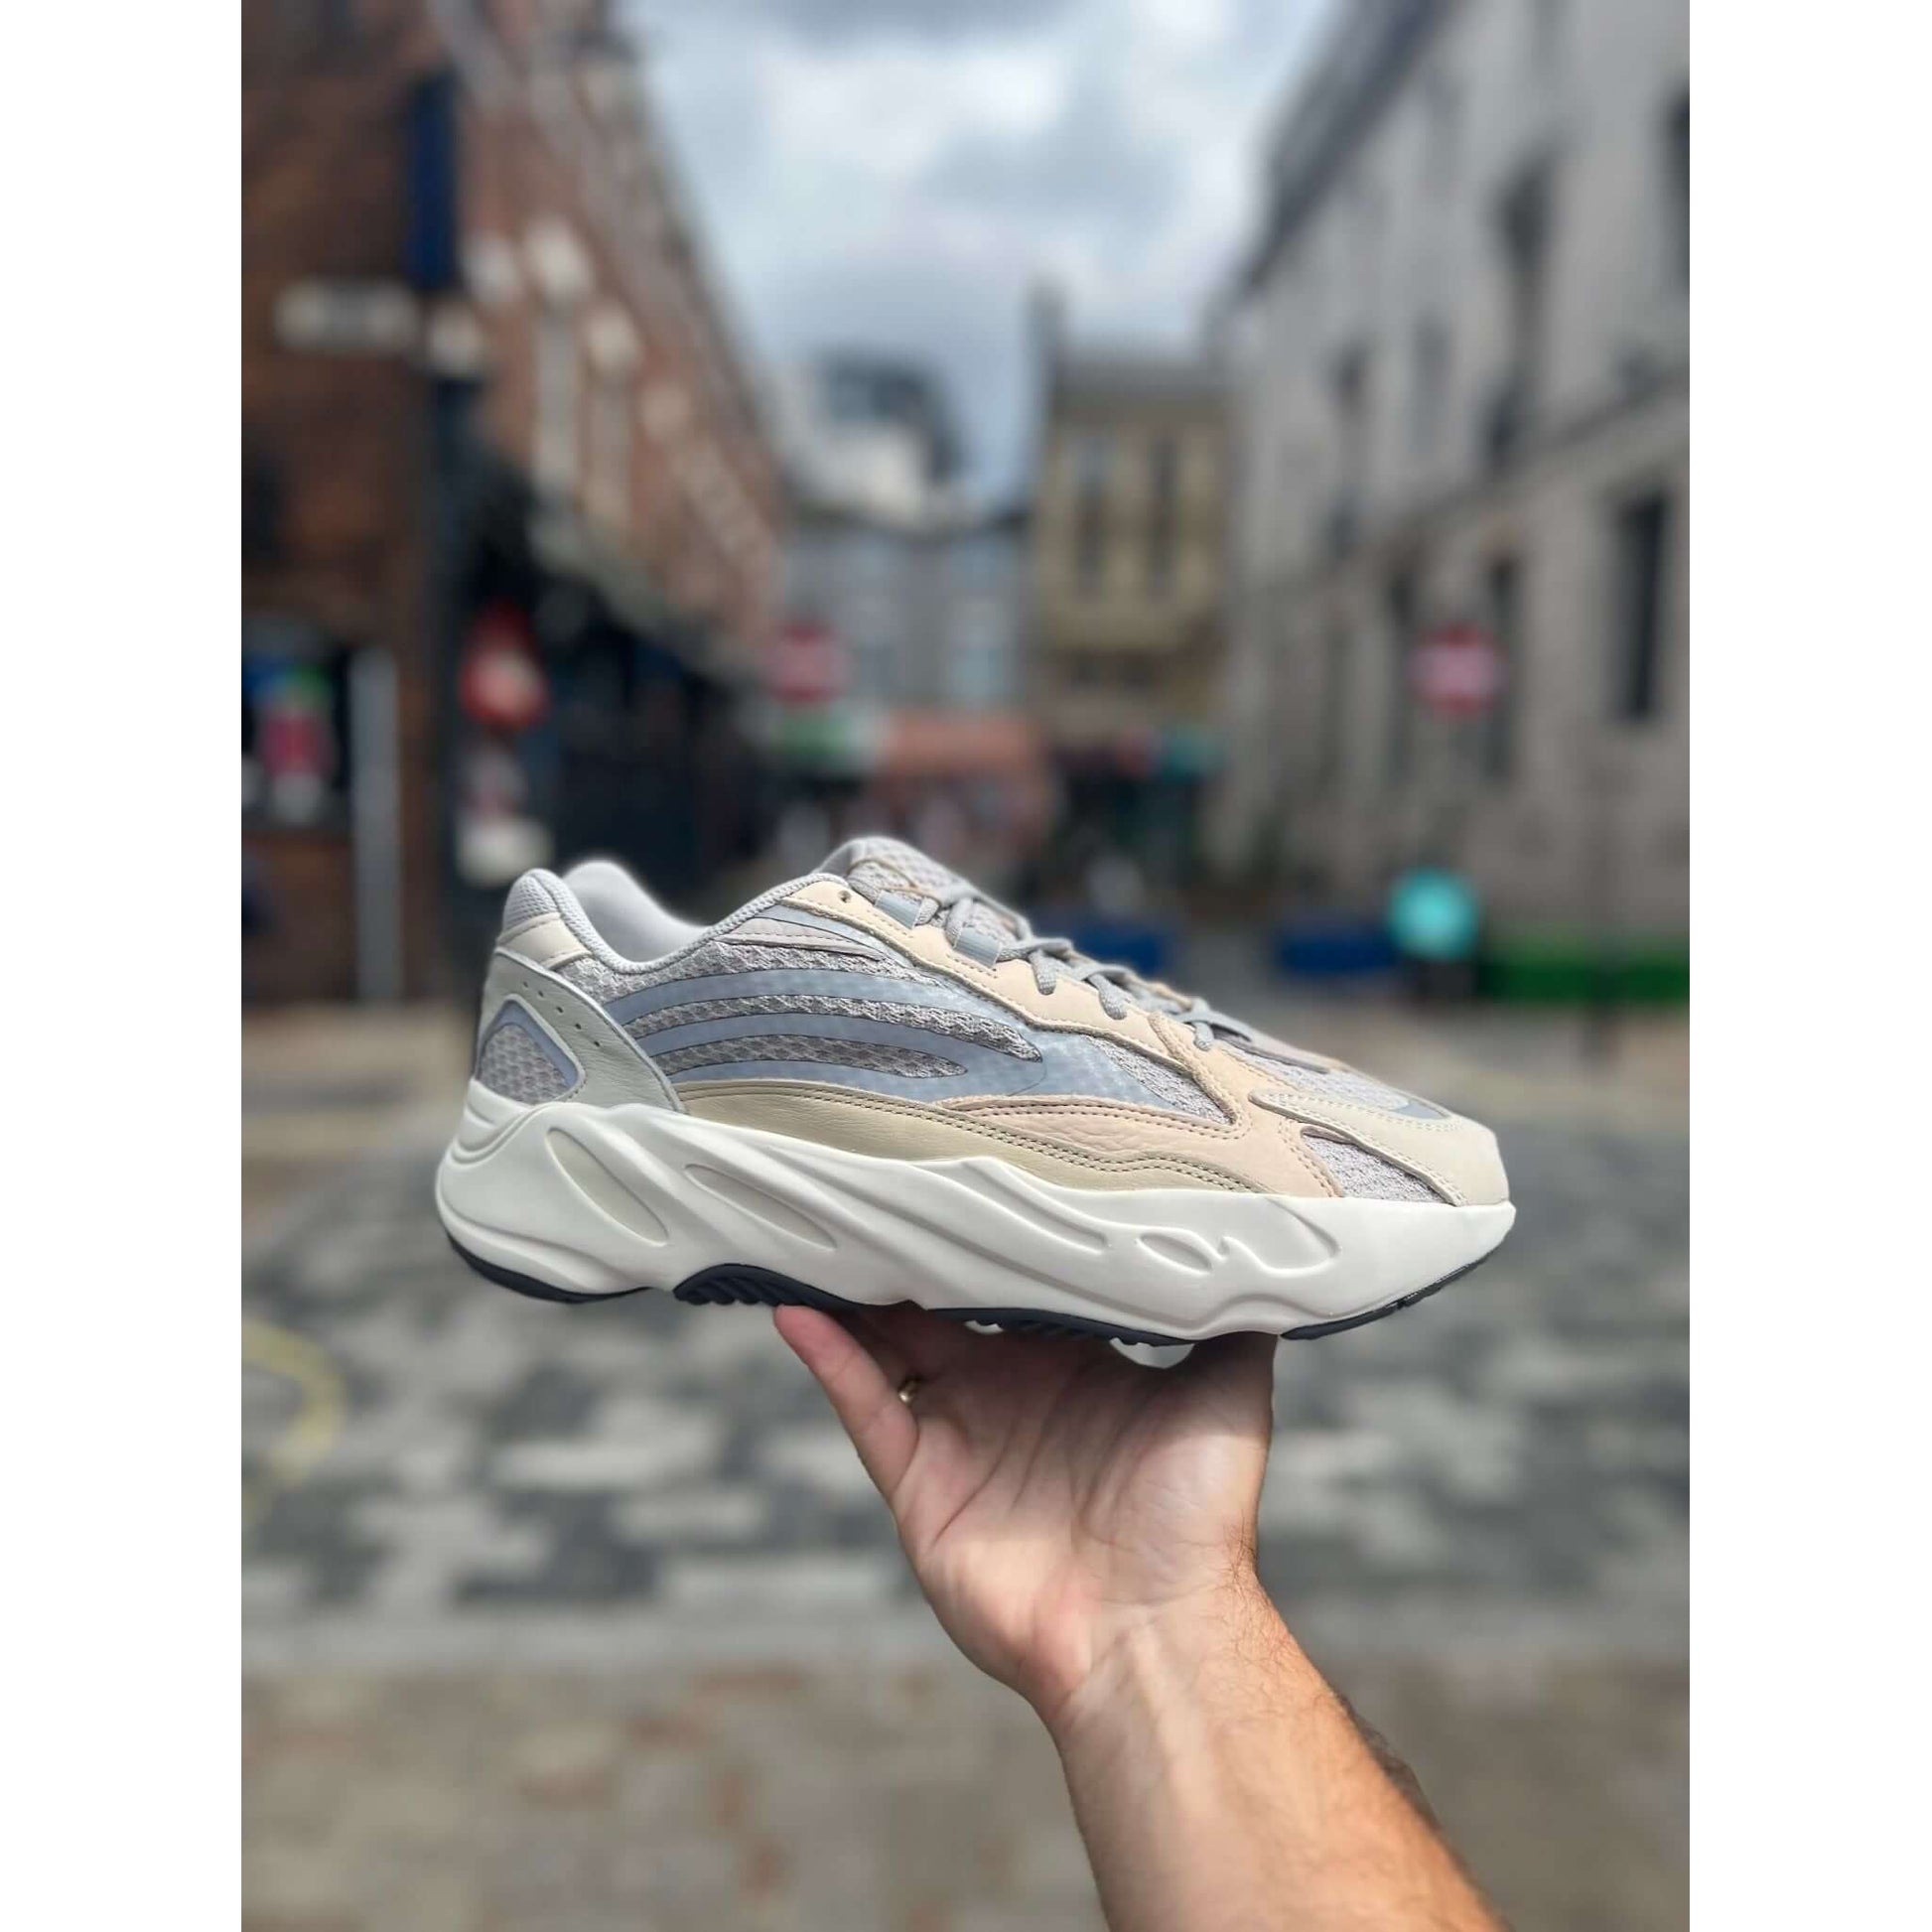 Adidas Yeezy Boost 700 V2 Cream by Yeezy from £293.00